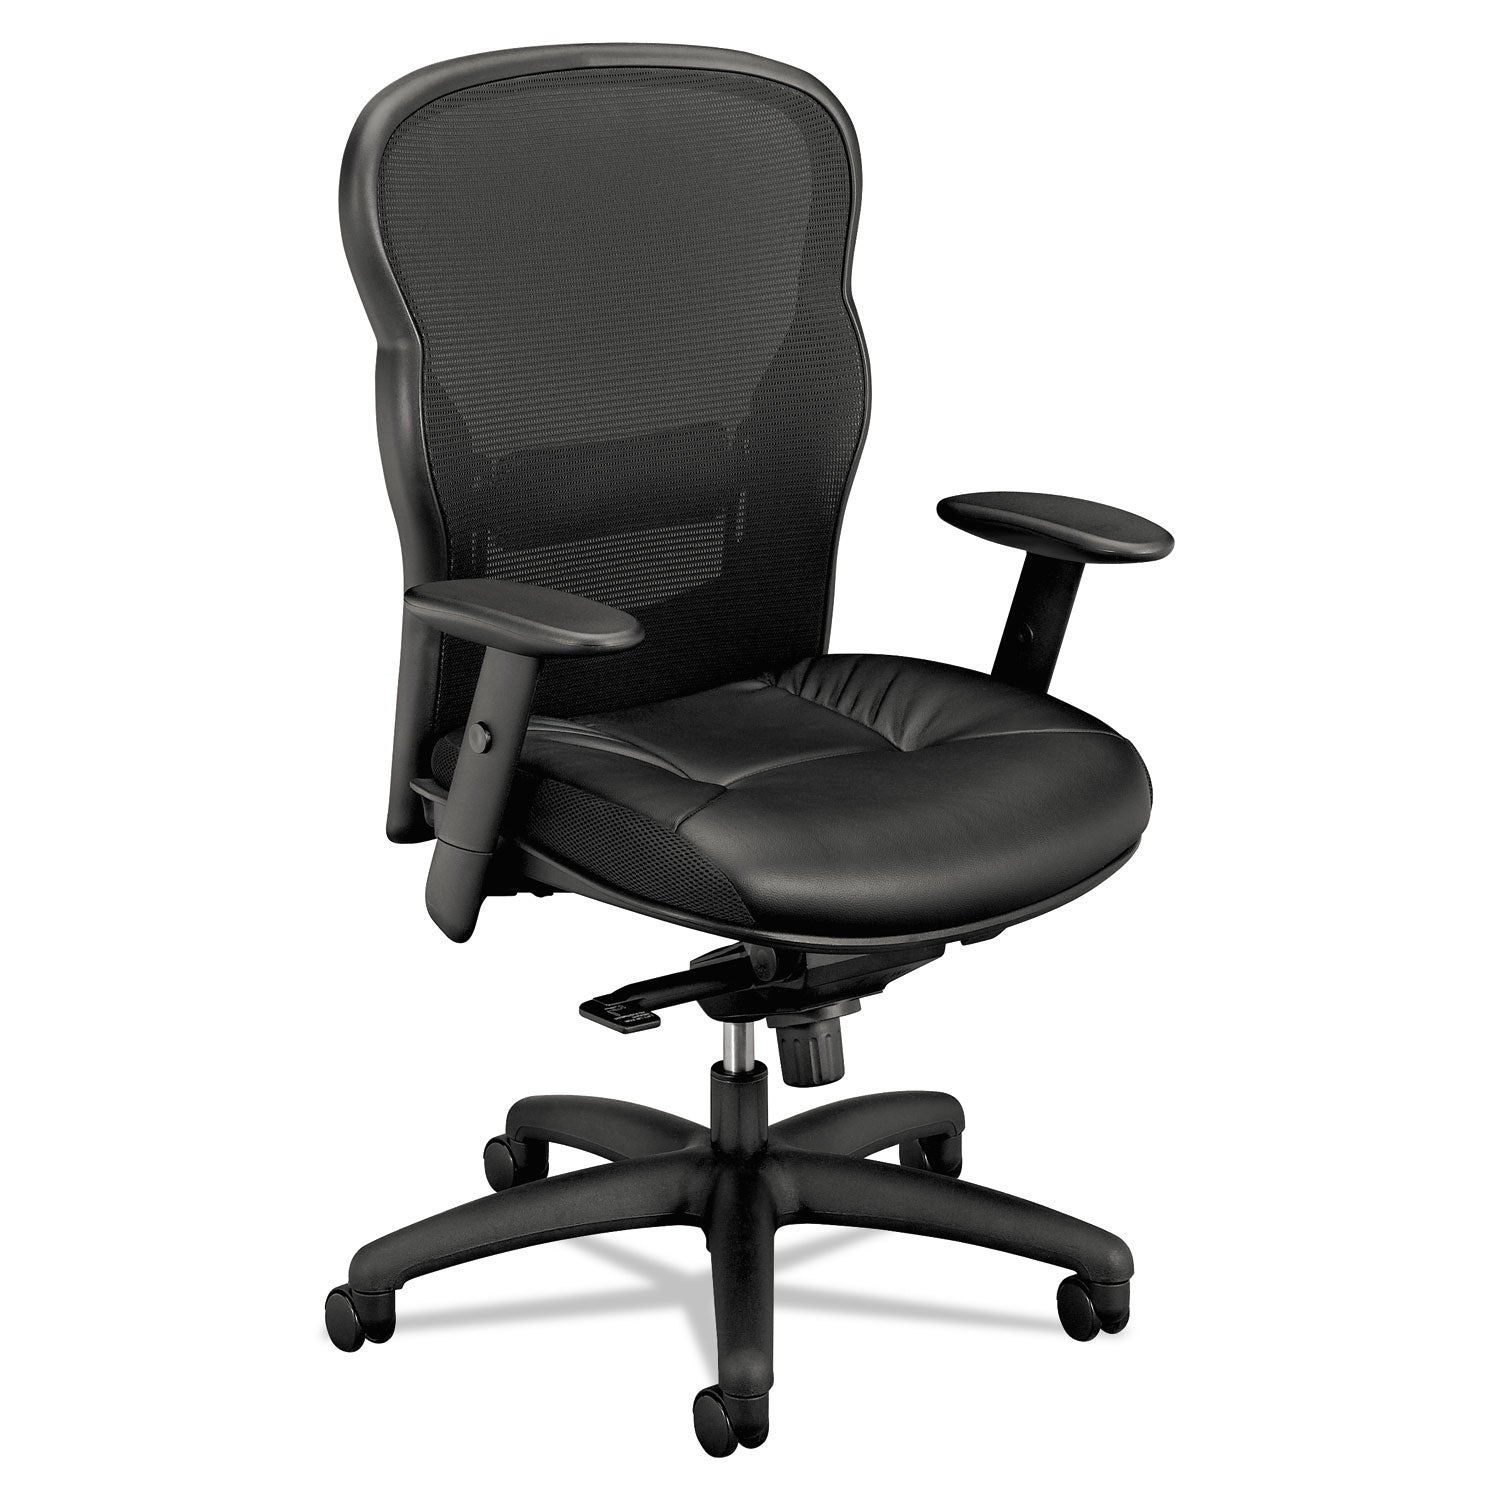 Wave Mesh High-Back Task Chair, Supports Up to 250 lb, 19.25" to 22" Seat Height, Black - 